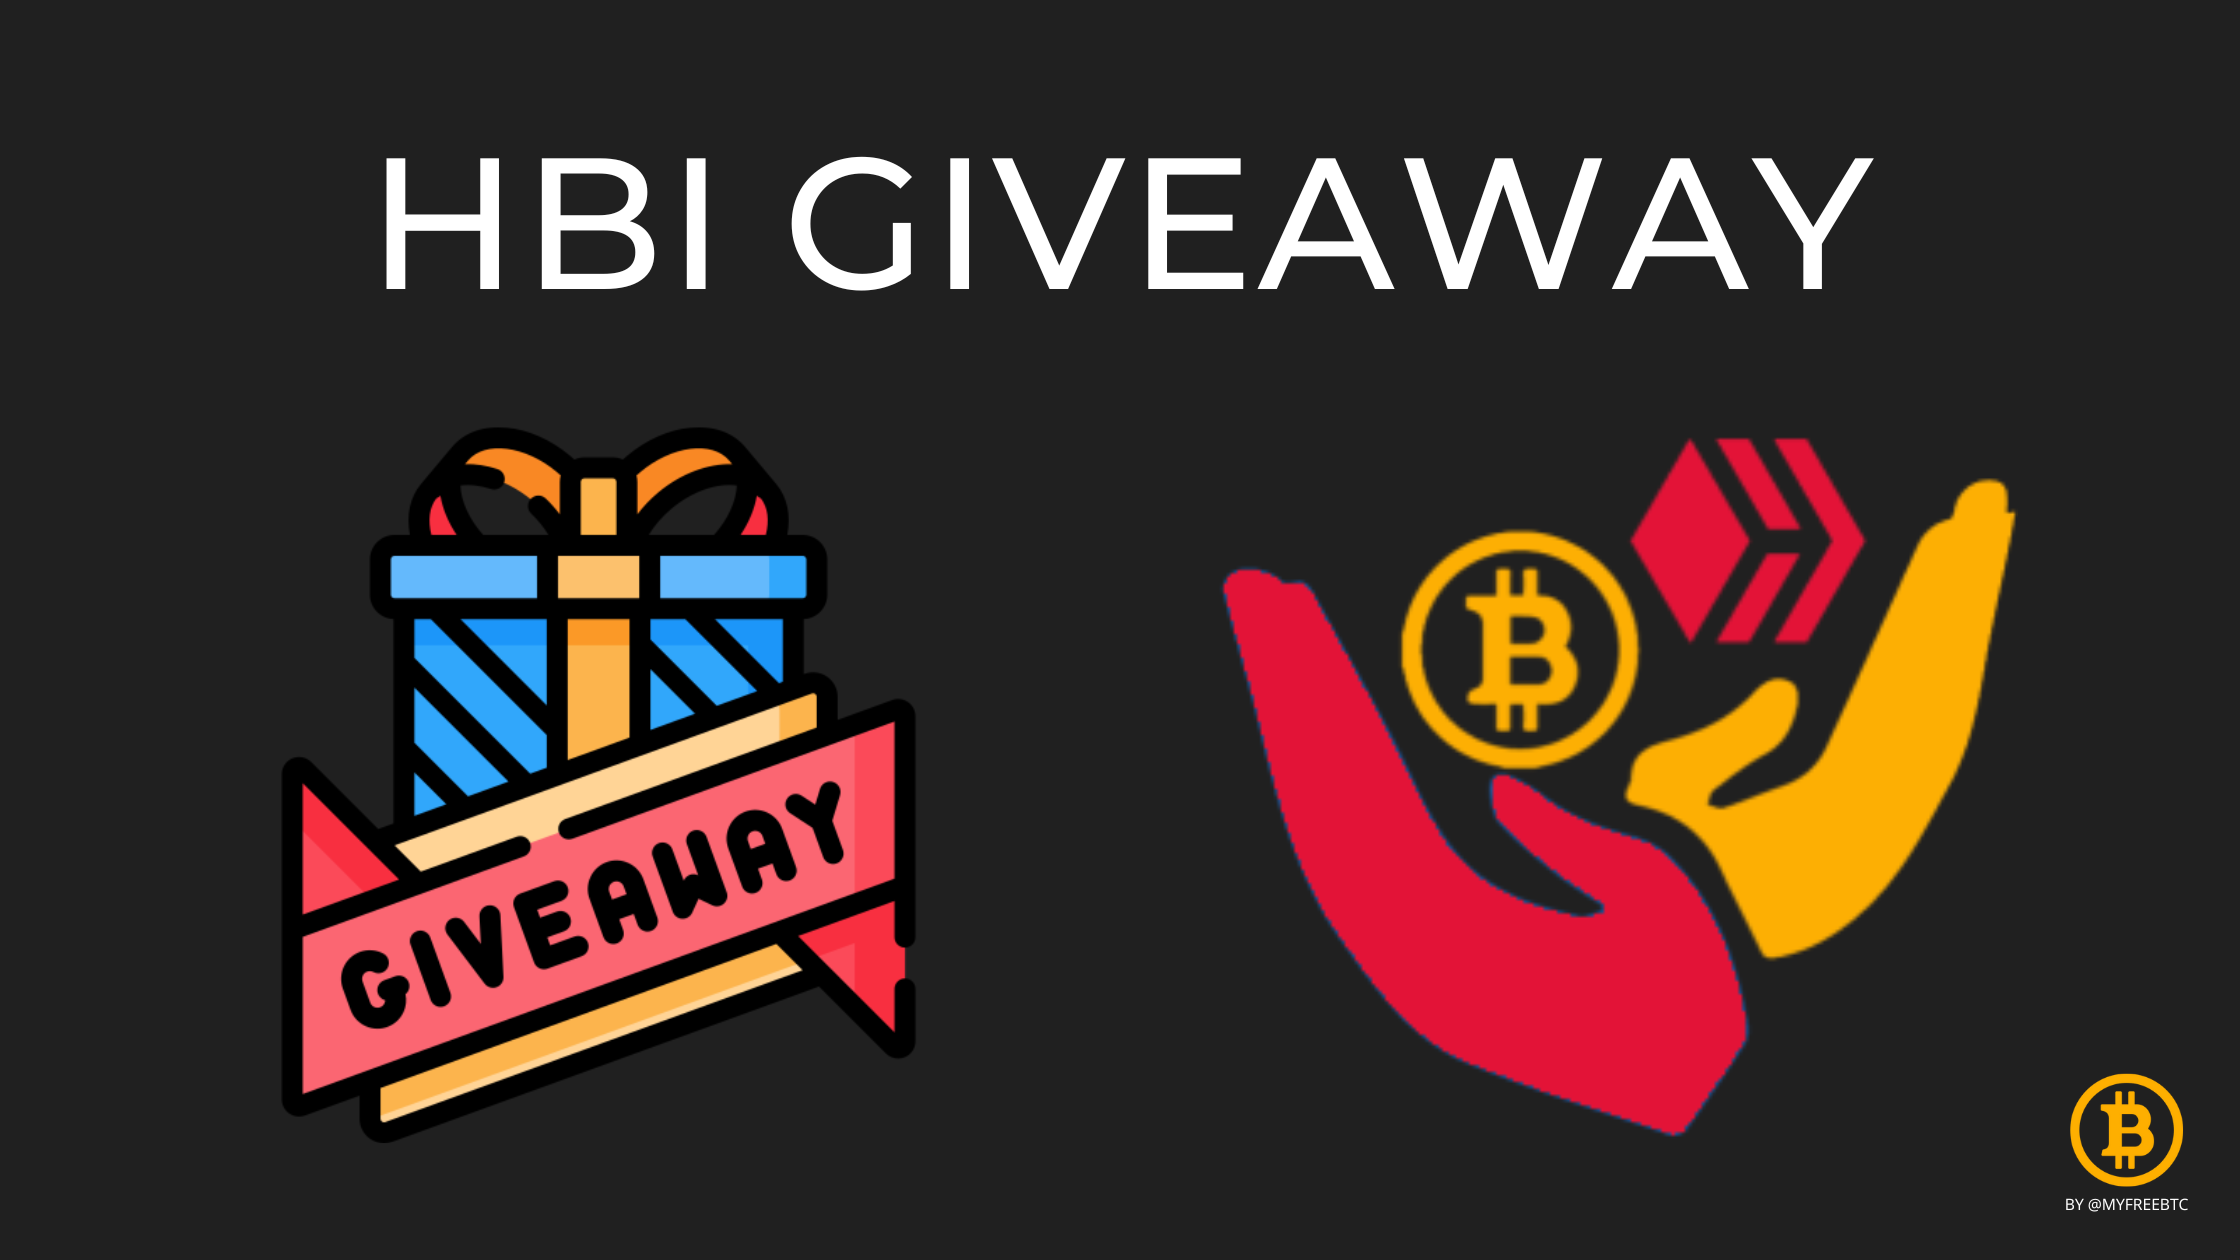 @myfreebtc/hbi-giveaway-vacations-over-time-to-grind